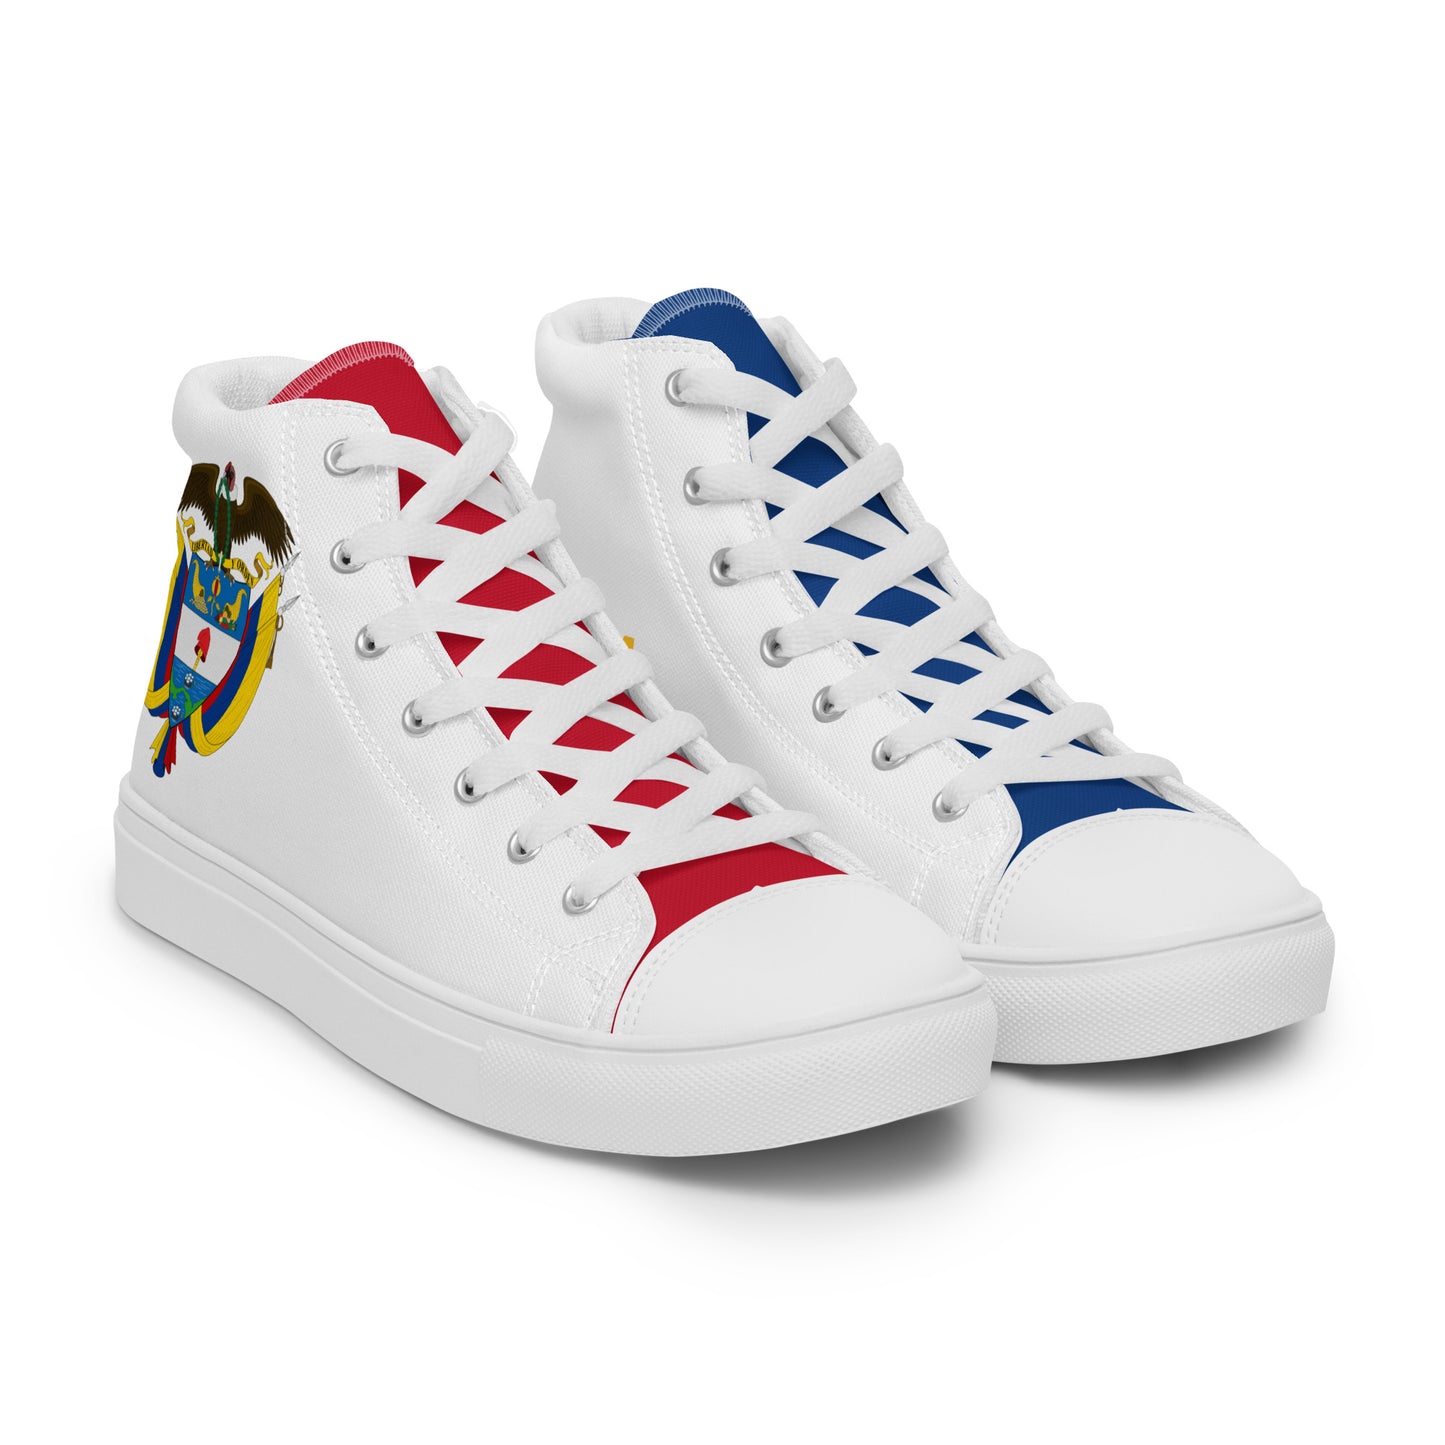 Colombia - Men - White - High top shoes